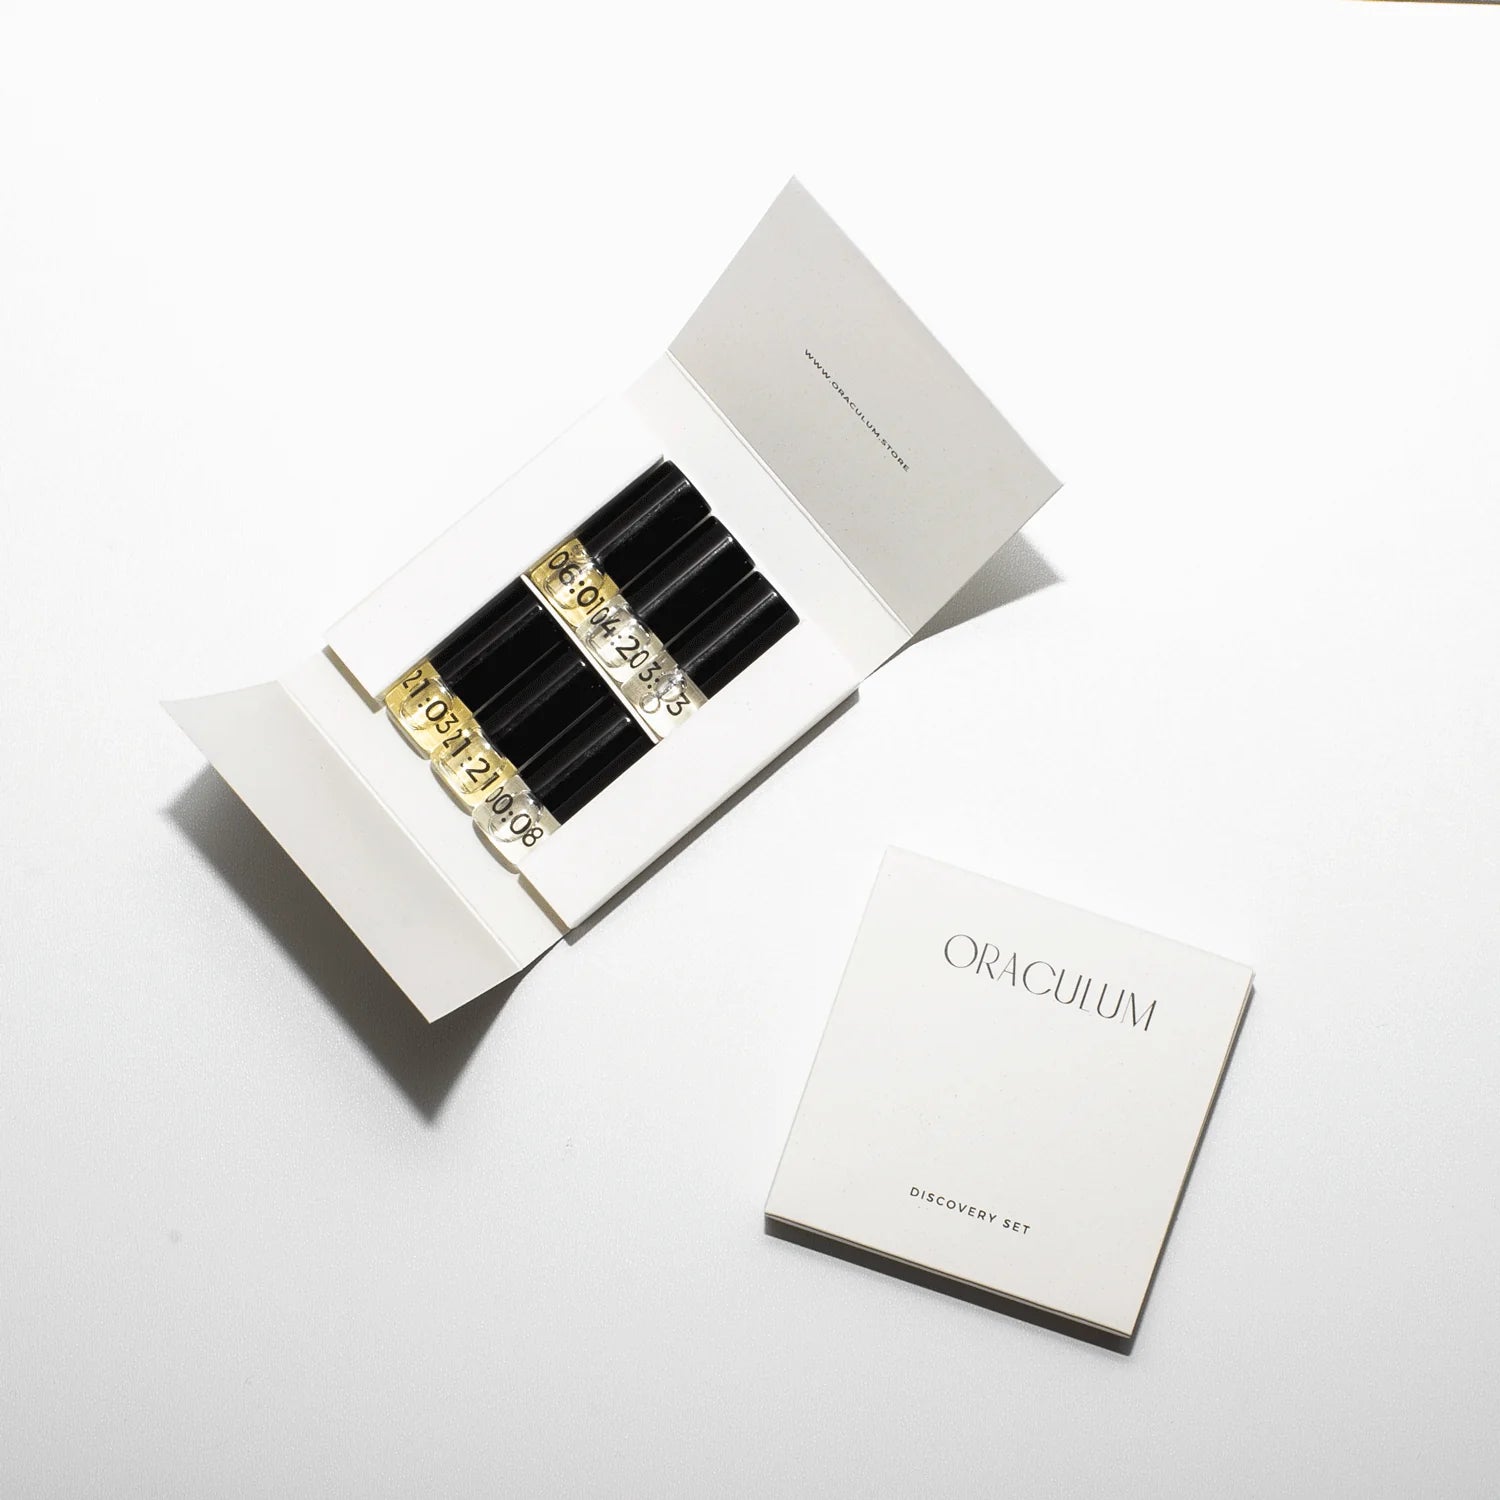 Oraculum - Discovery Set Oil Perfumes